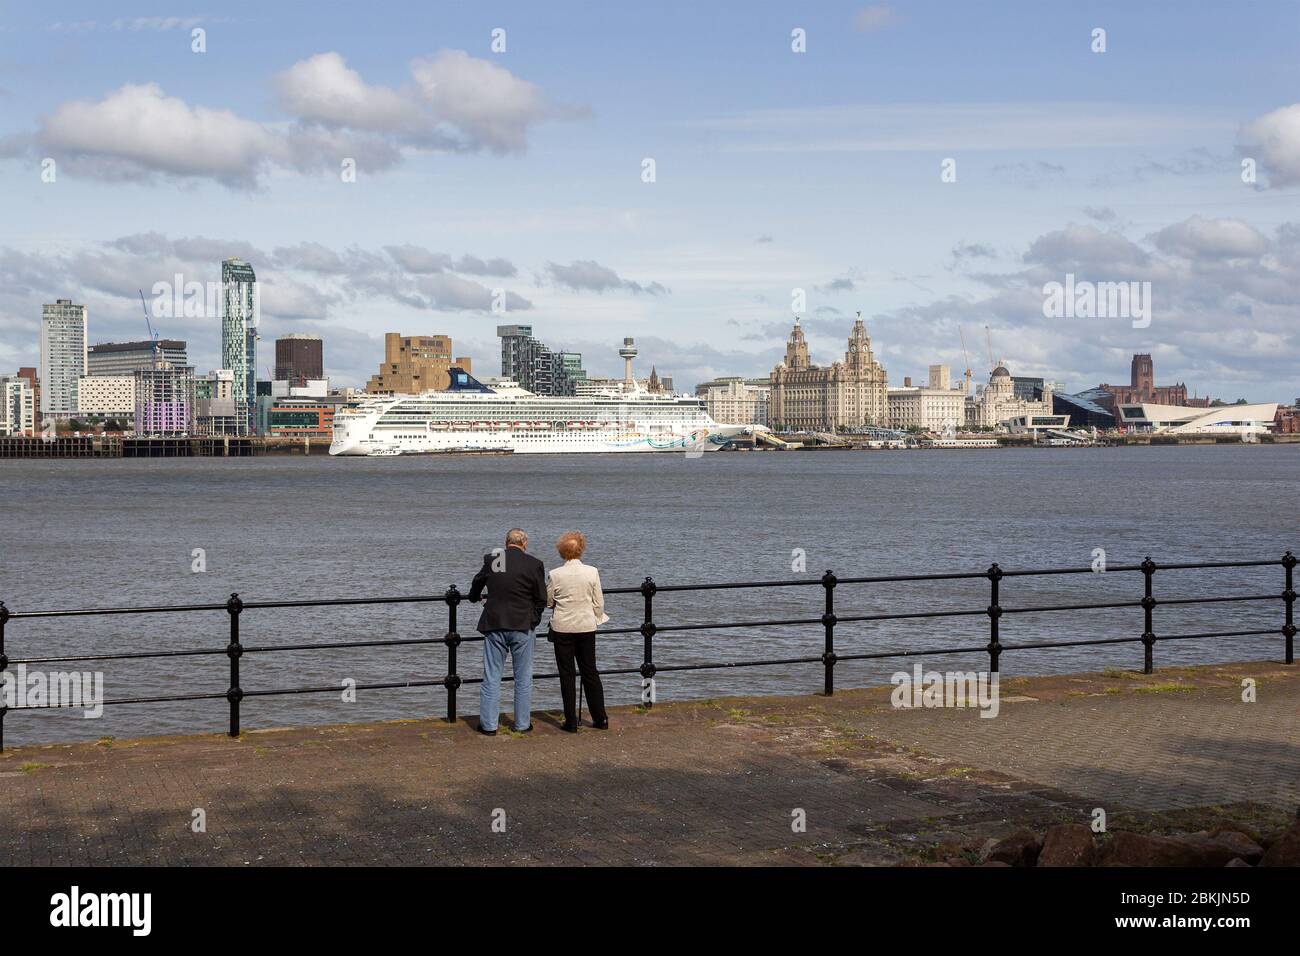 Elderly couple view Norwegian Spirit cruise ship on River Mersey, Liverpool from Seacombe ferry terminal. Stock Photo